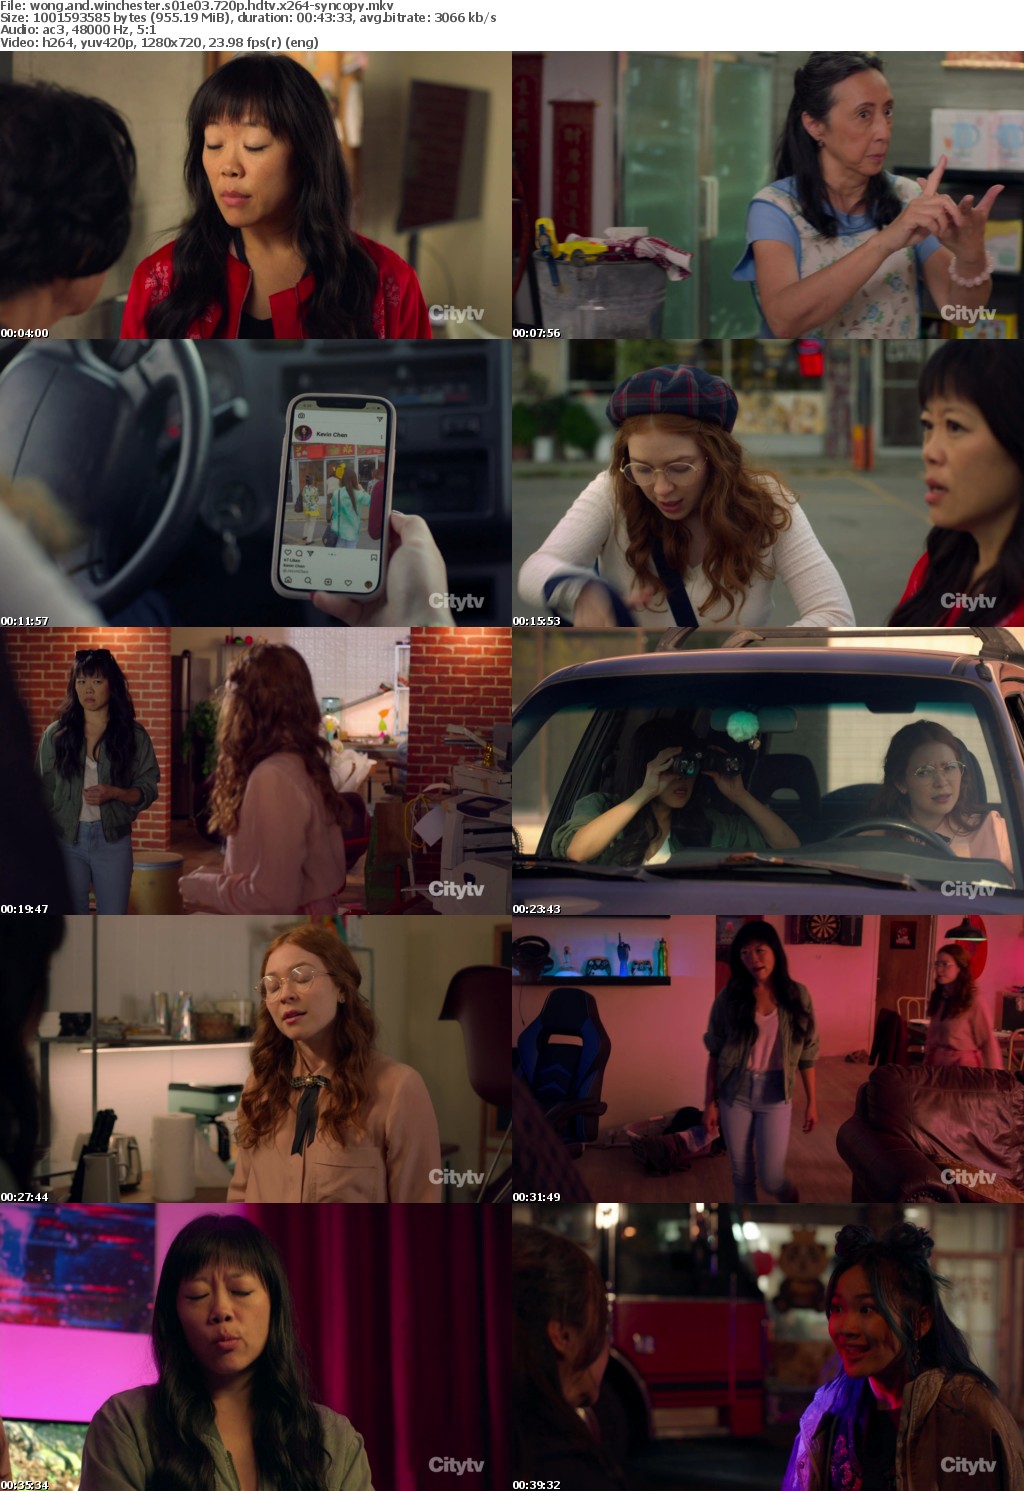 Wong and Winchester S01E03 720p HDTV x264-SYNCOPY